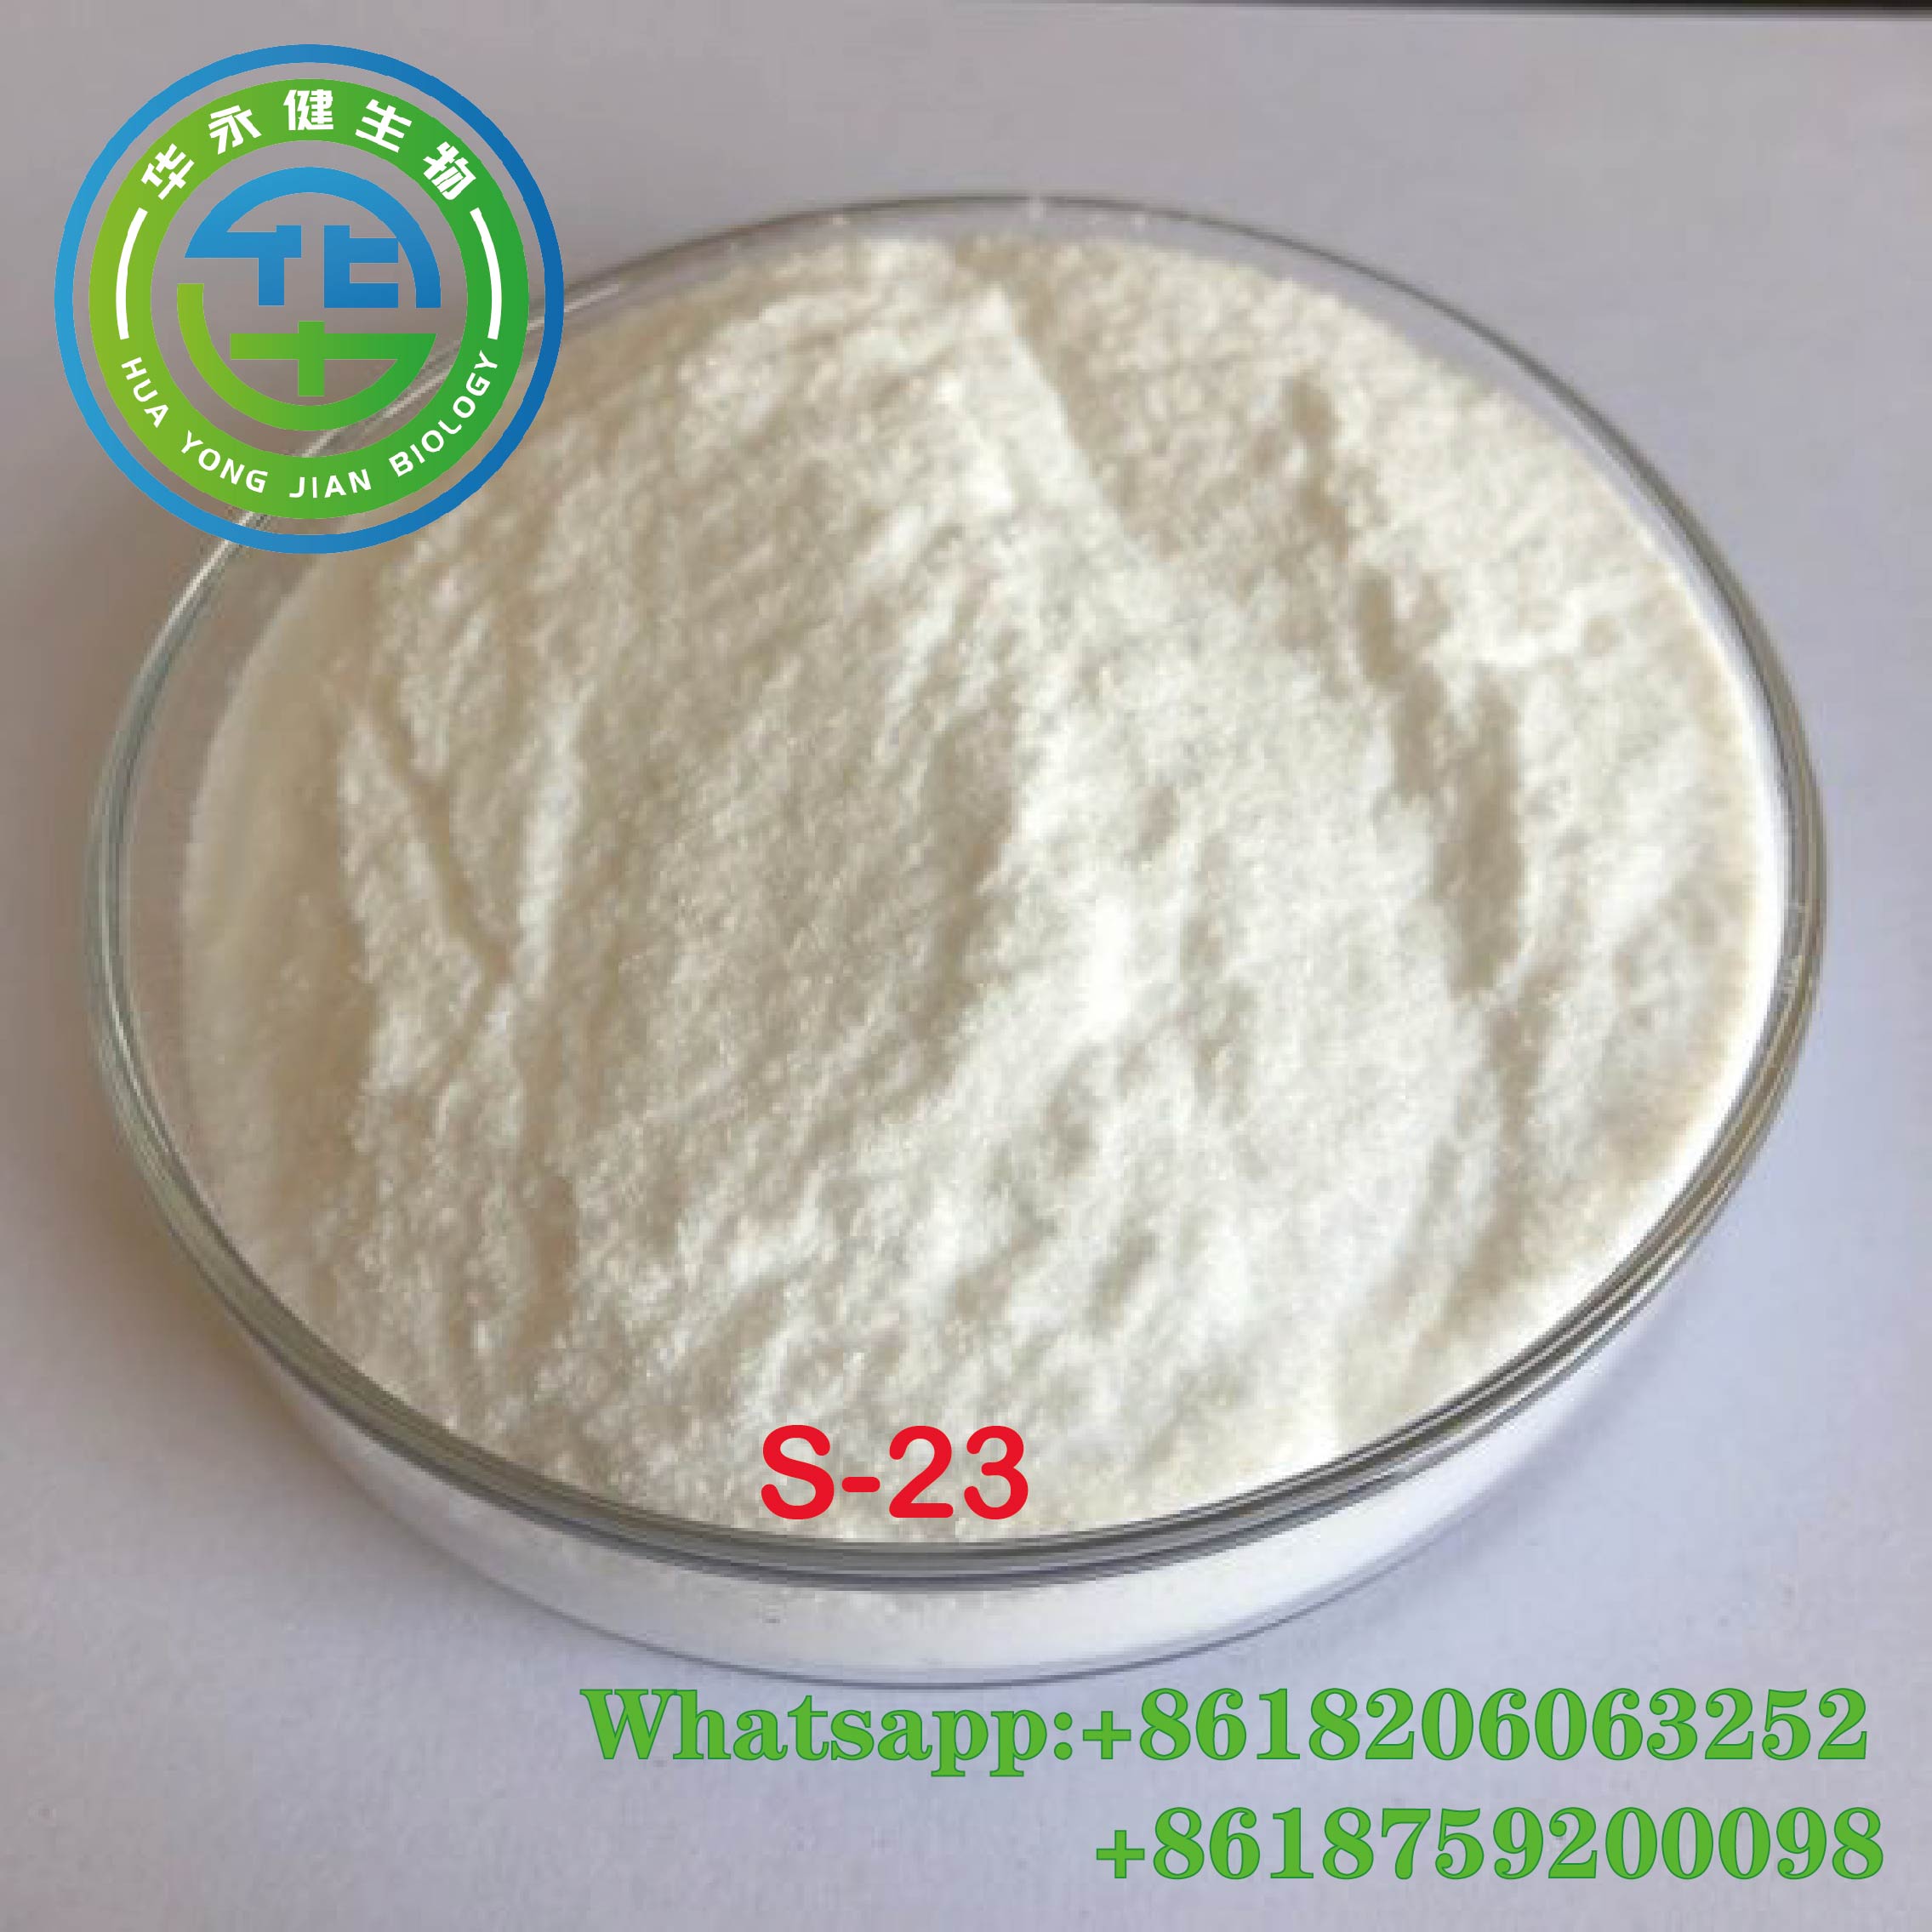 99.9% Purity Powder Sarms Steroids S-23 with Safe and Fast Domestic Shipping CasNO.1010396-29-8